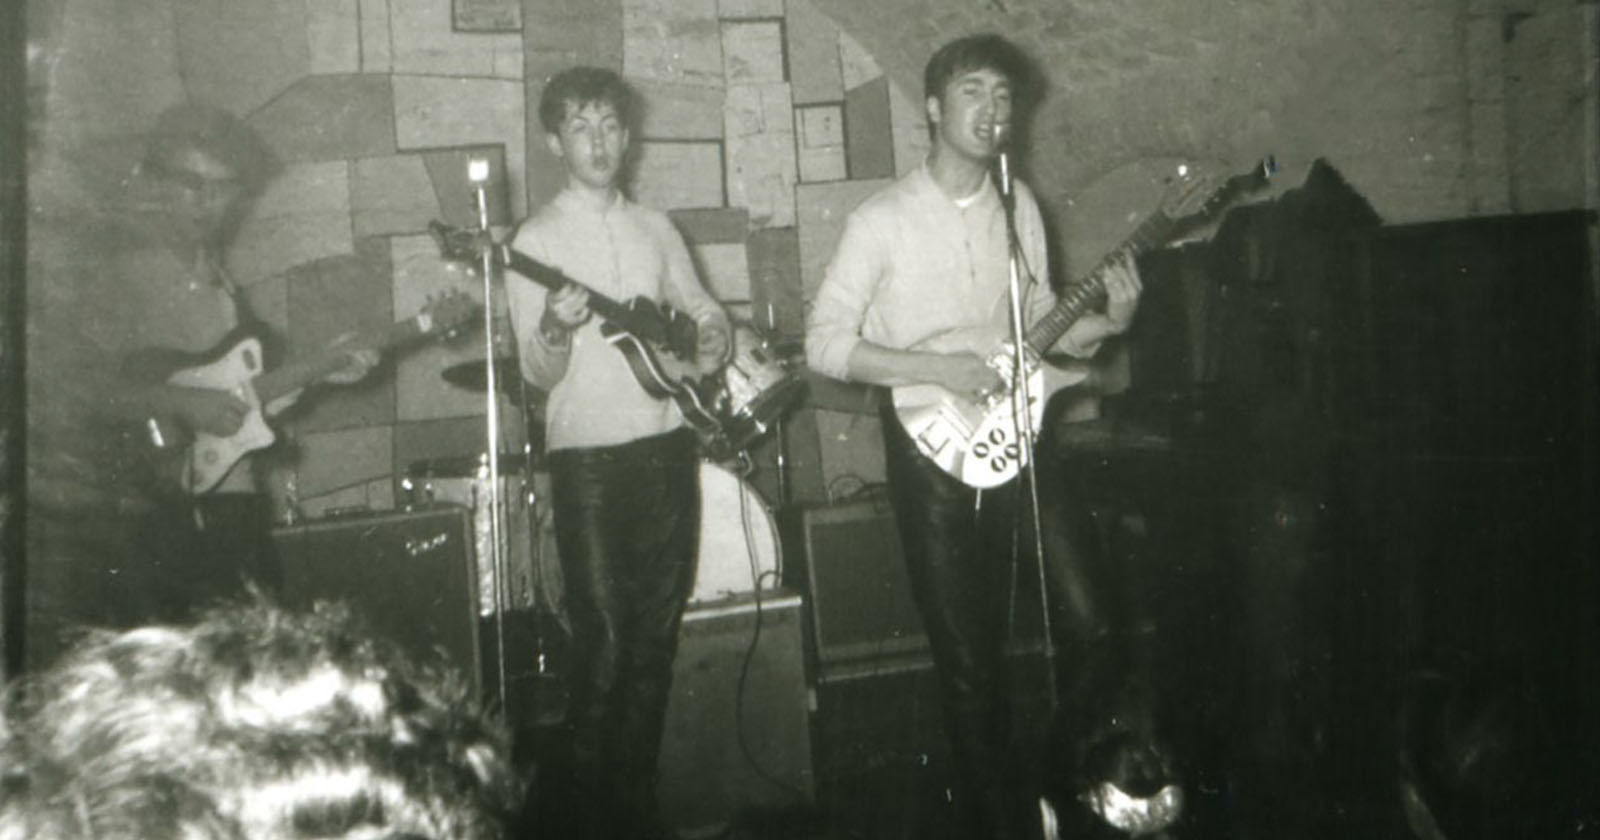 Rare, Previously Unseen Photos Show Beatles Performing at a Club in 1961